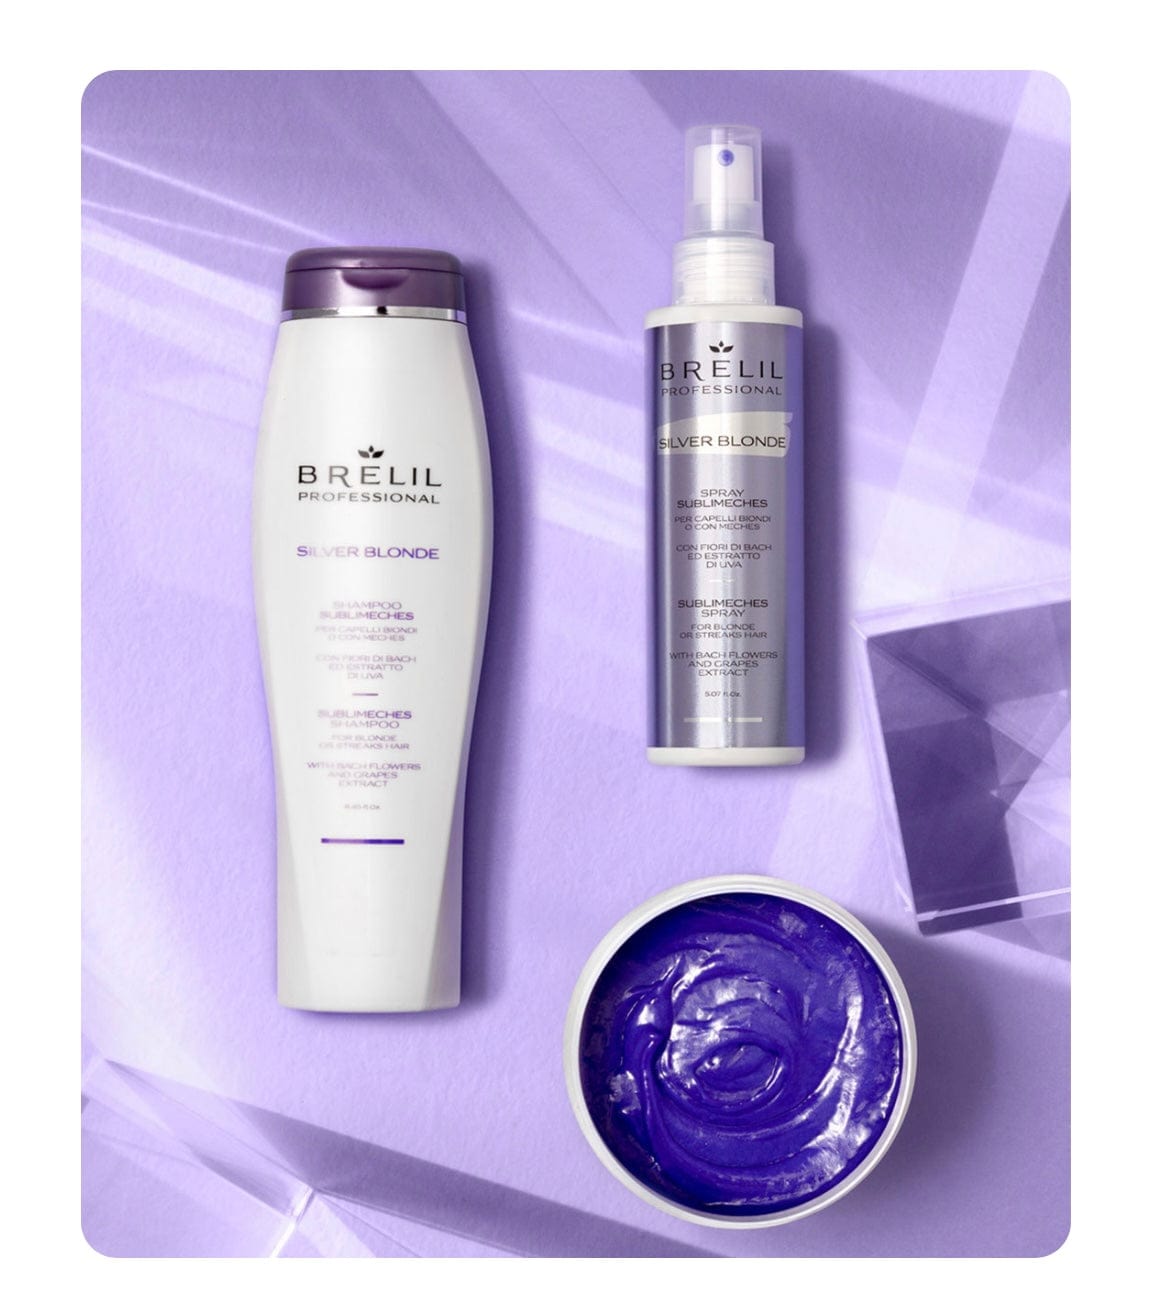 Purple Mask Silver Blonde Or Highlighted Hair 7.44oz Hair Mask